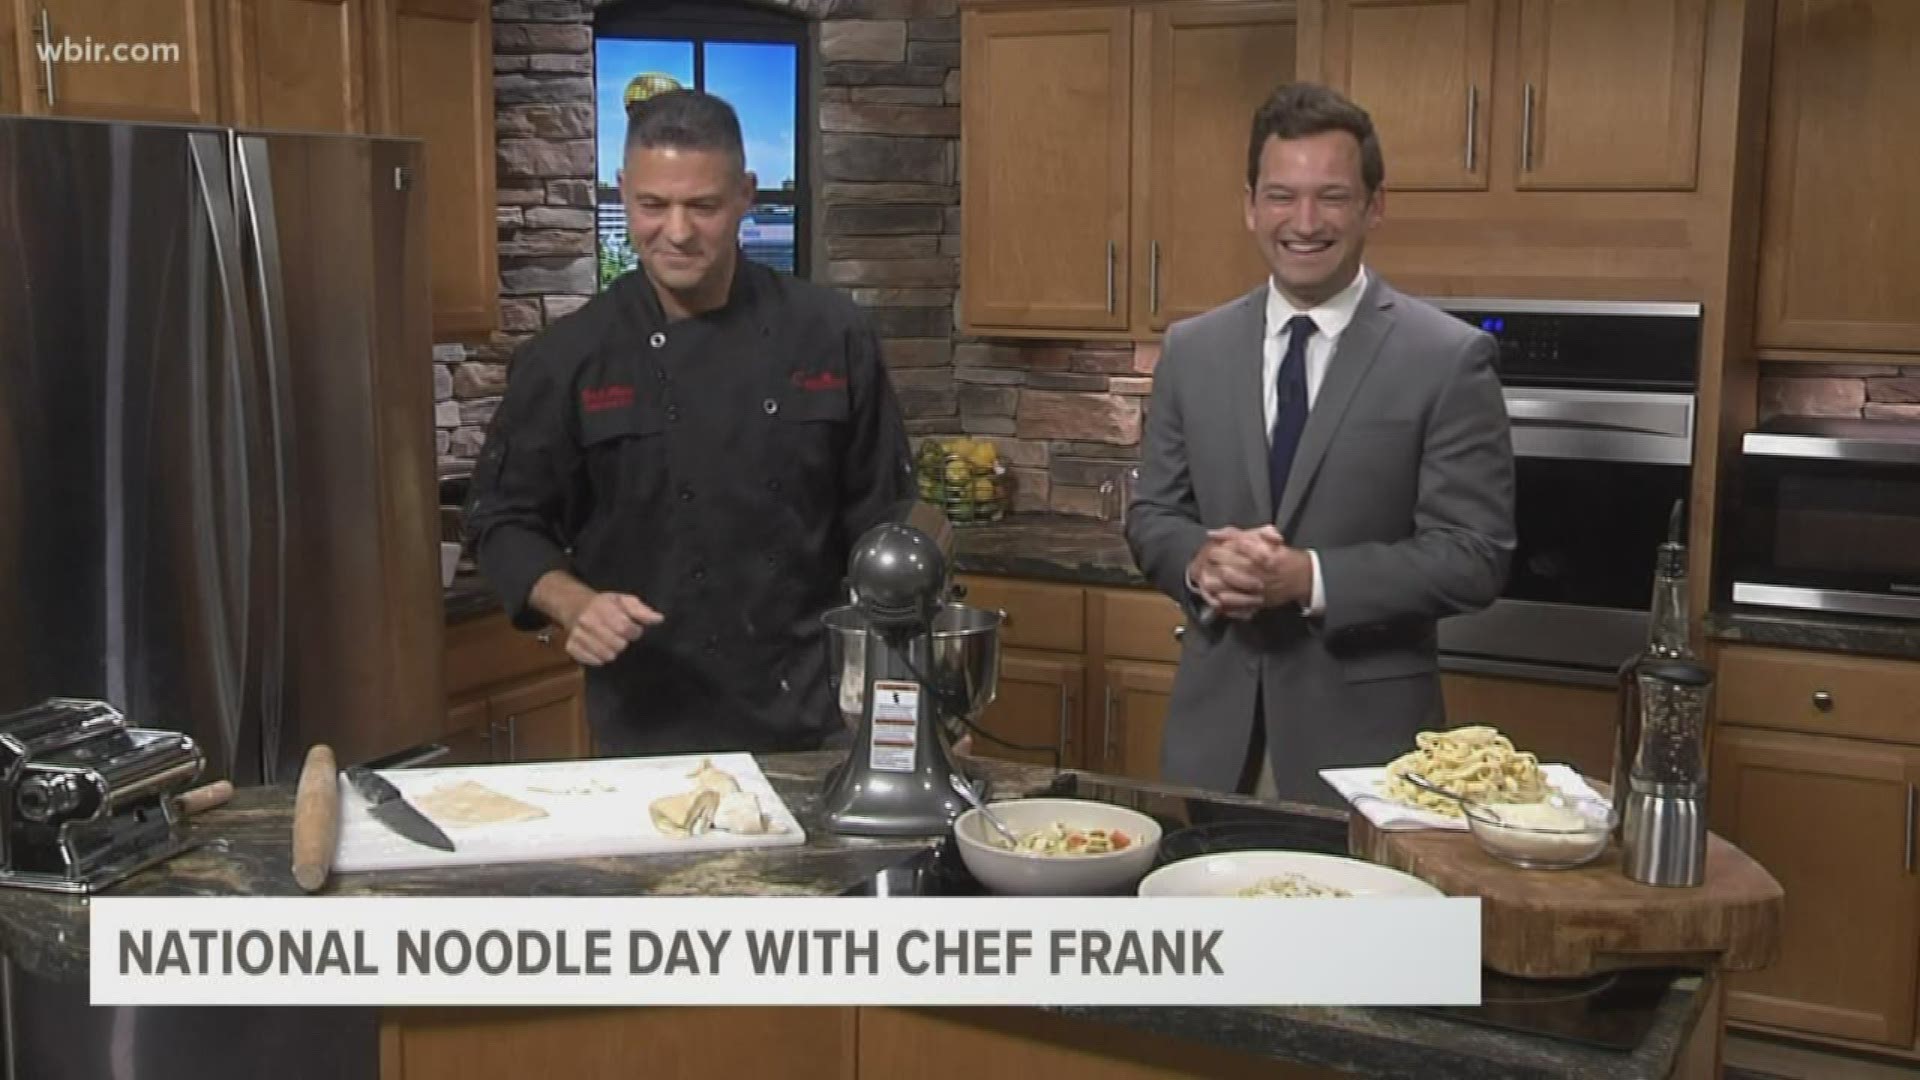 Chef Frank Aloise from Cappuccino's joins us in the kitchen to make pasta for National Noodle Day!